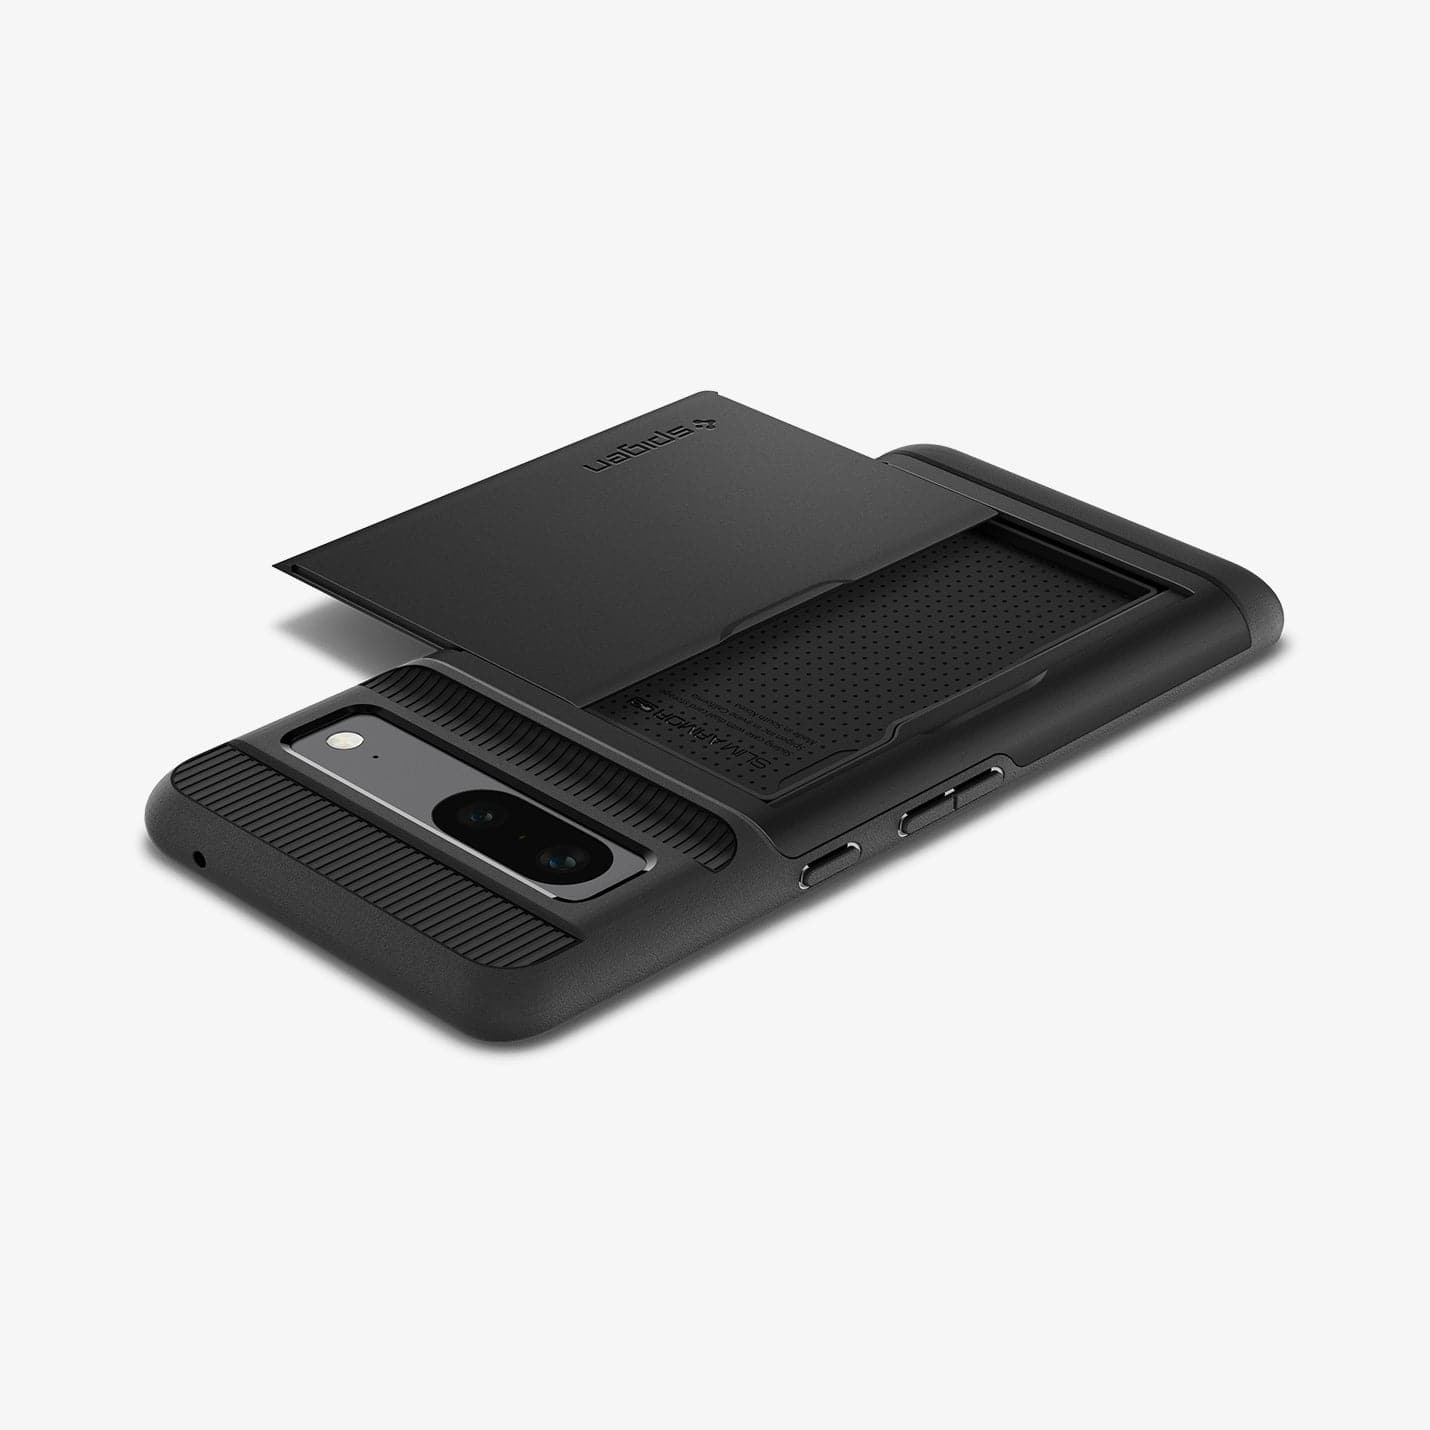 ACS04704 - Pixel 7 Case Slim Armor CS in black showing the back and side with device laying flat